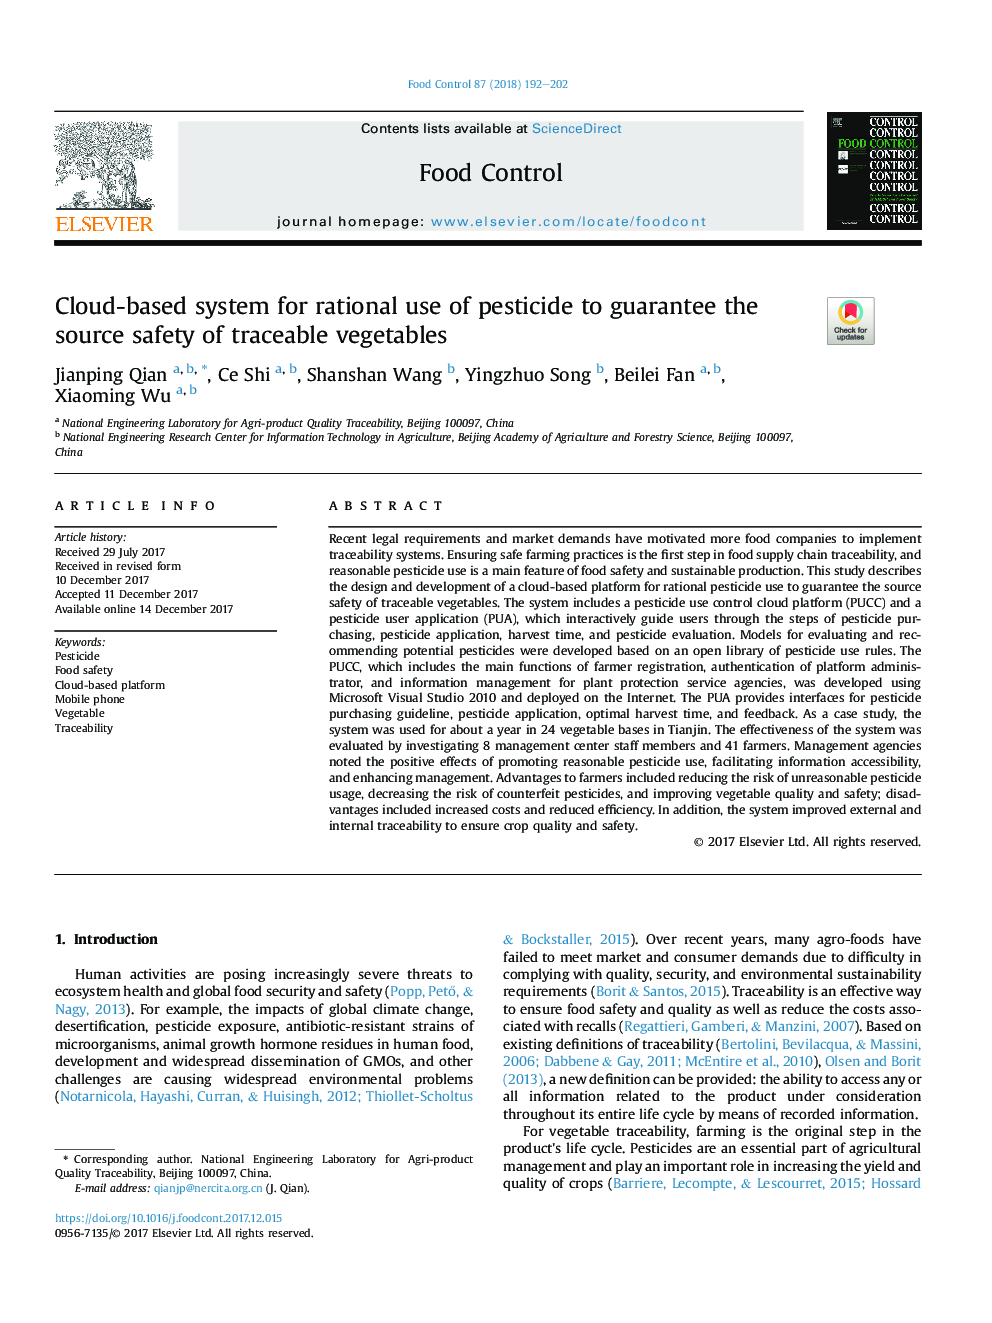 Cloud-based system for rational use of pesticide to guarantee the source safety of traceable vegetables